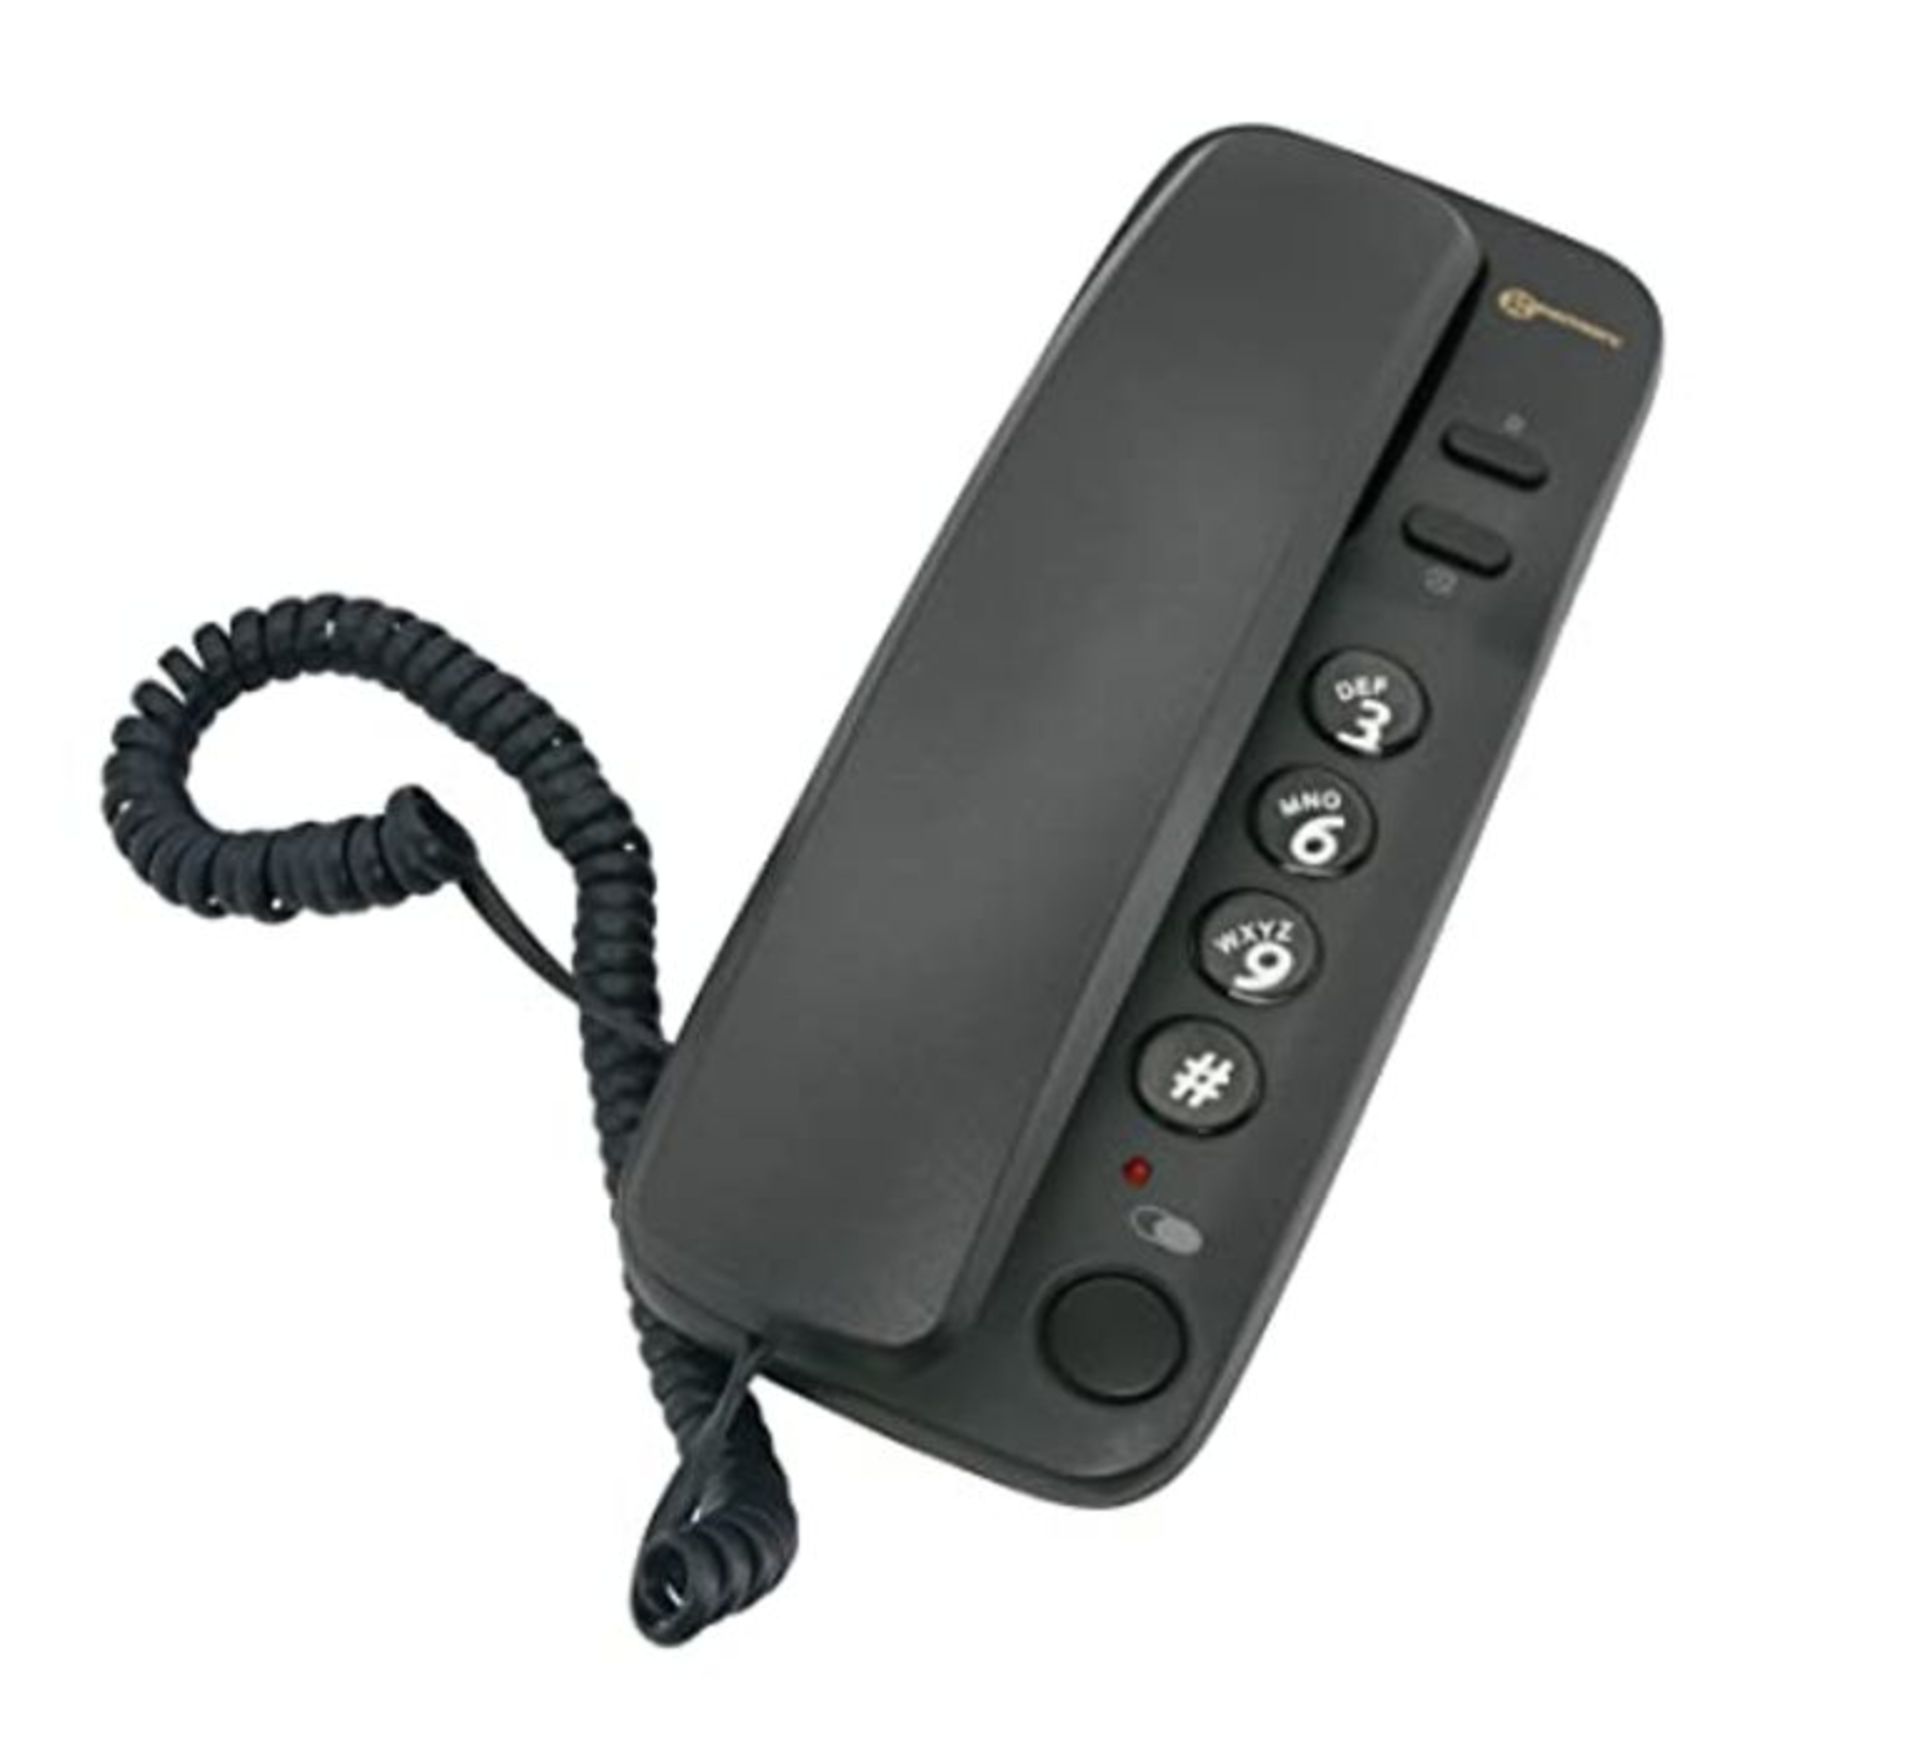 Geemarc Marbella - Gondola Style Corded Analogue Telephone with Large Buttons, Mute Fu